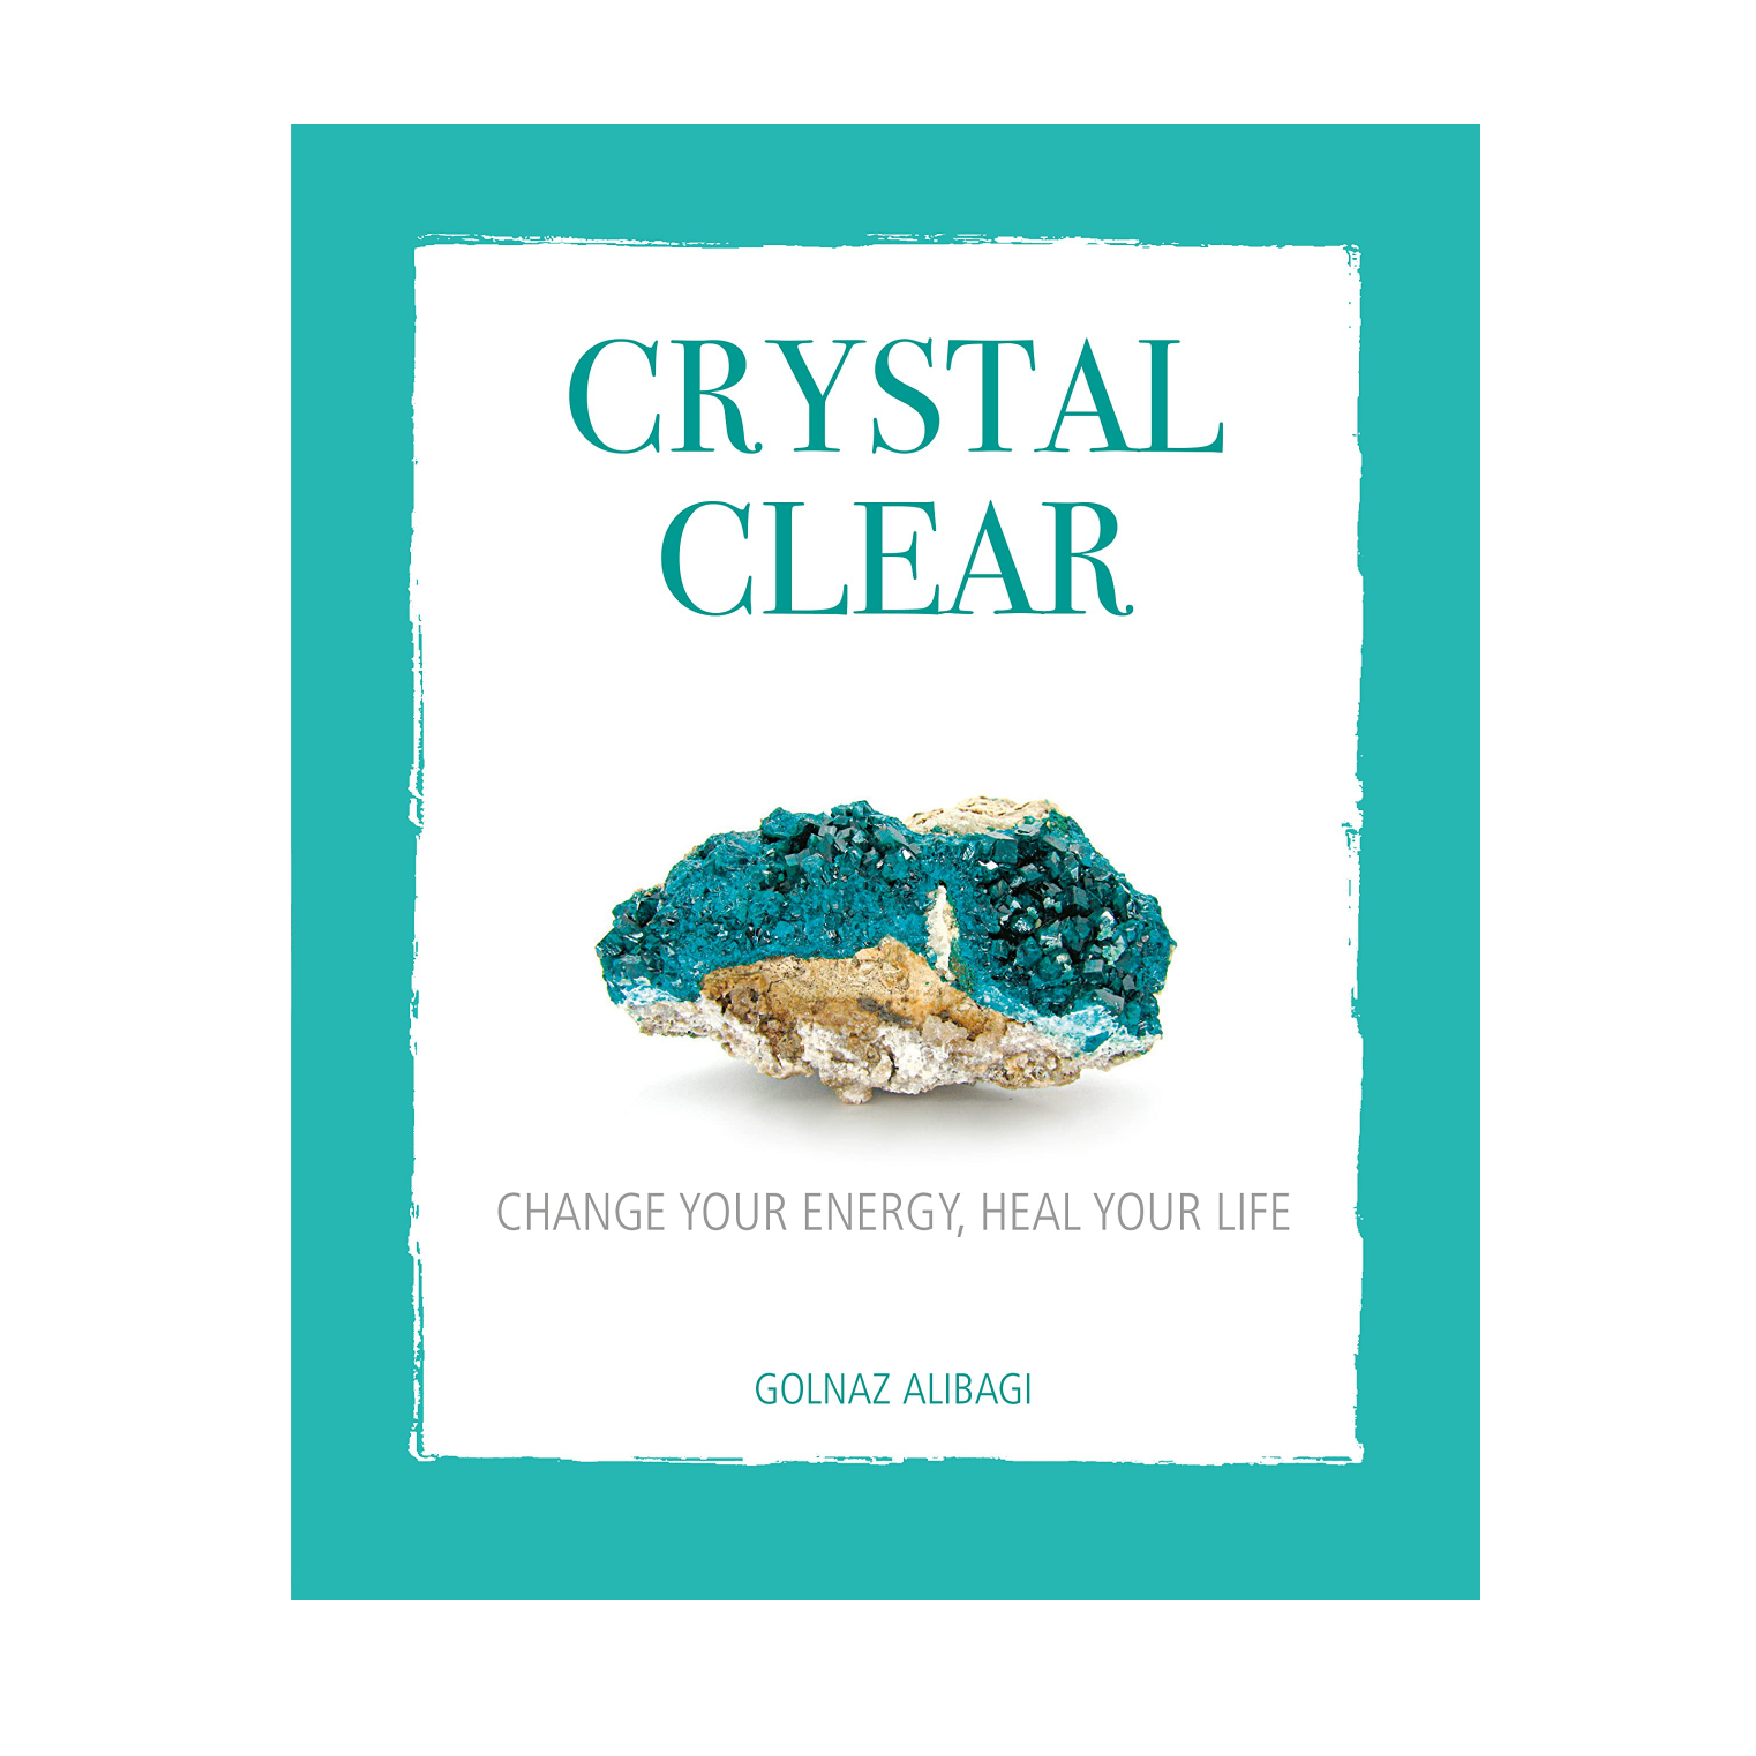 THE ESSENTIAL GUIDE TO CRYSTALS {GOLNAZ ALIBAGI}